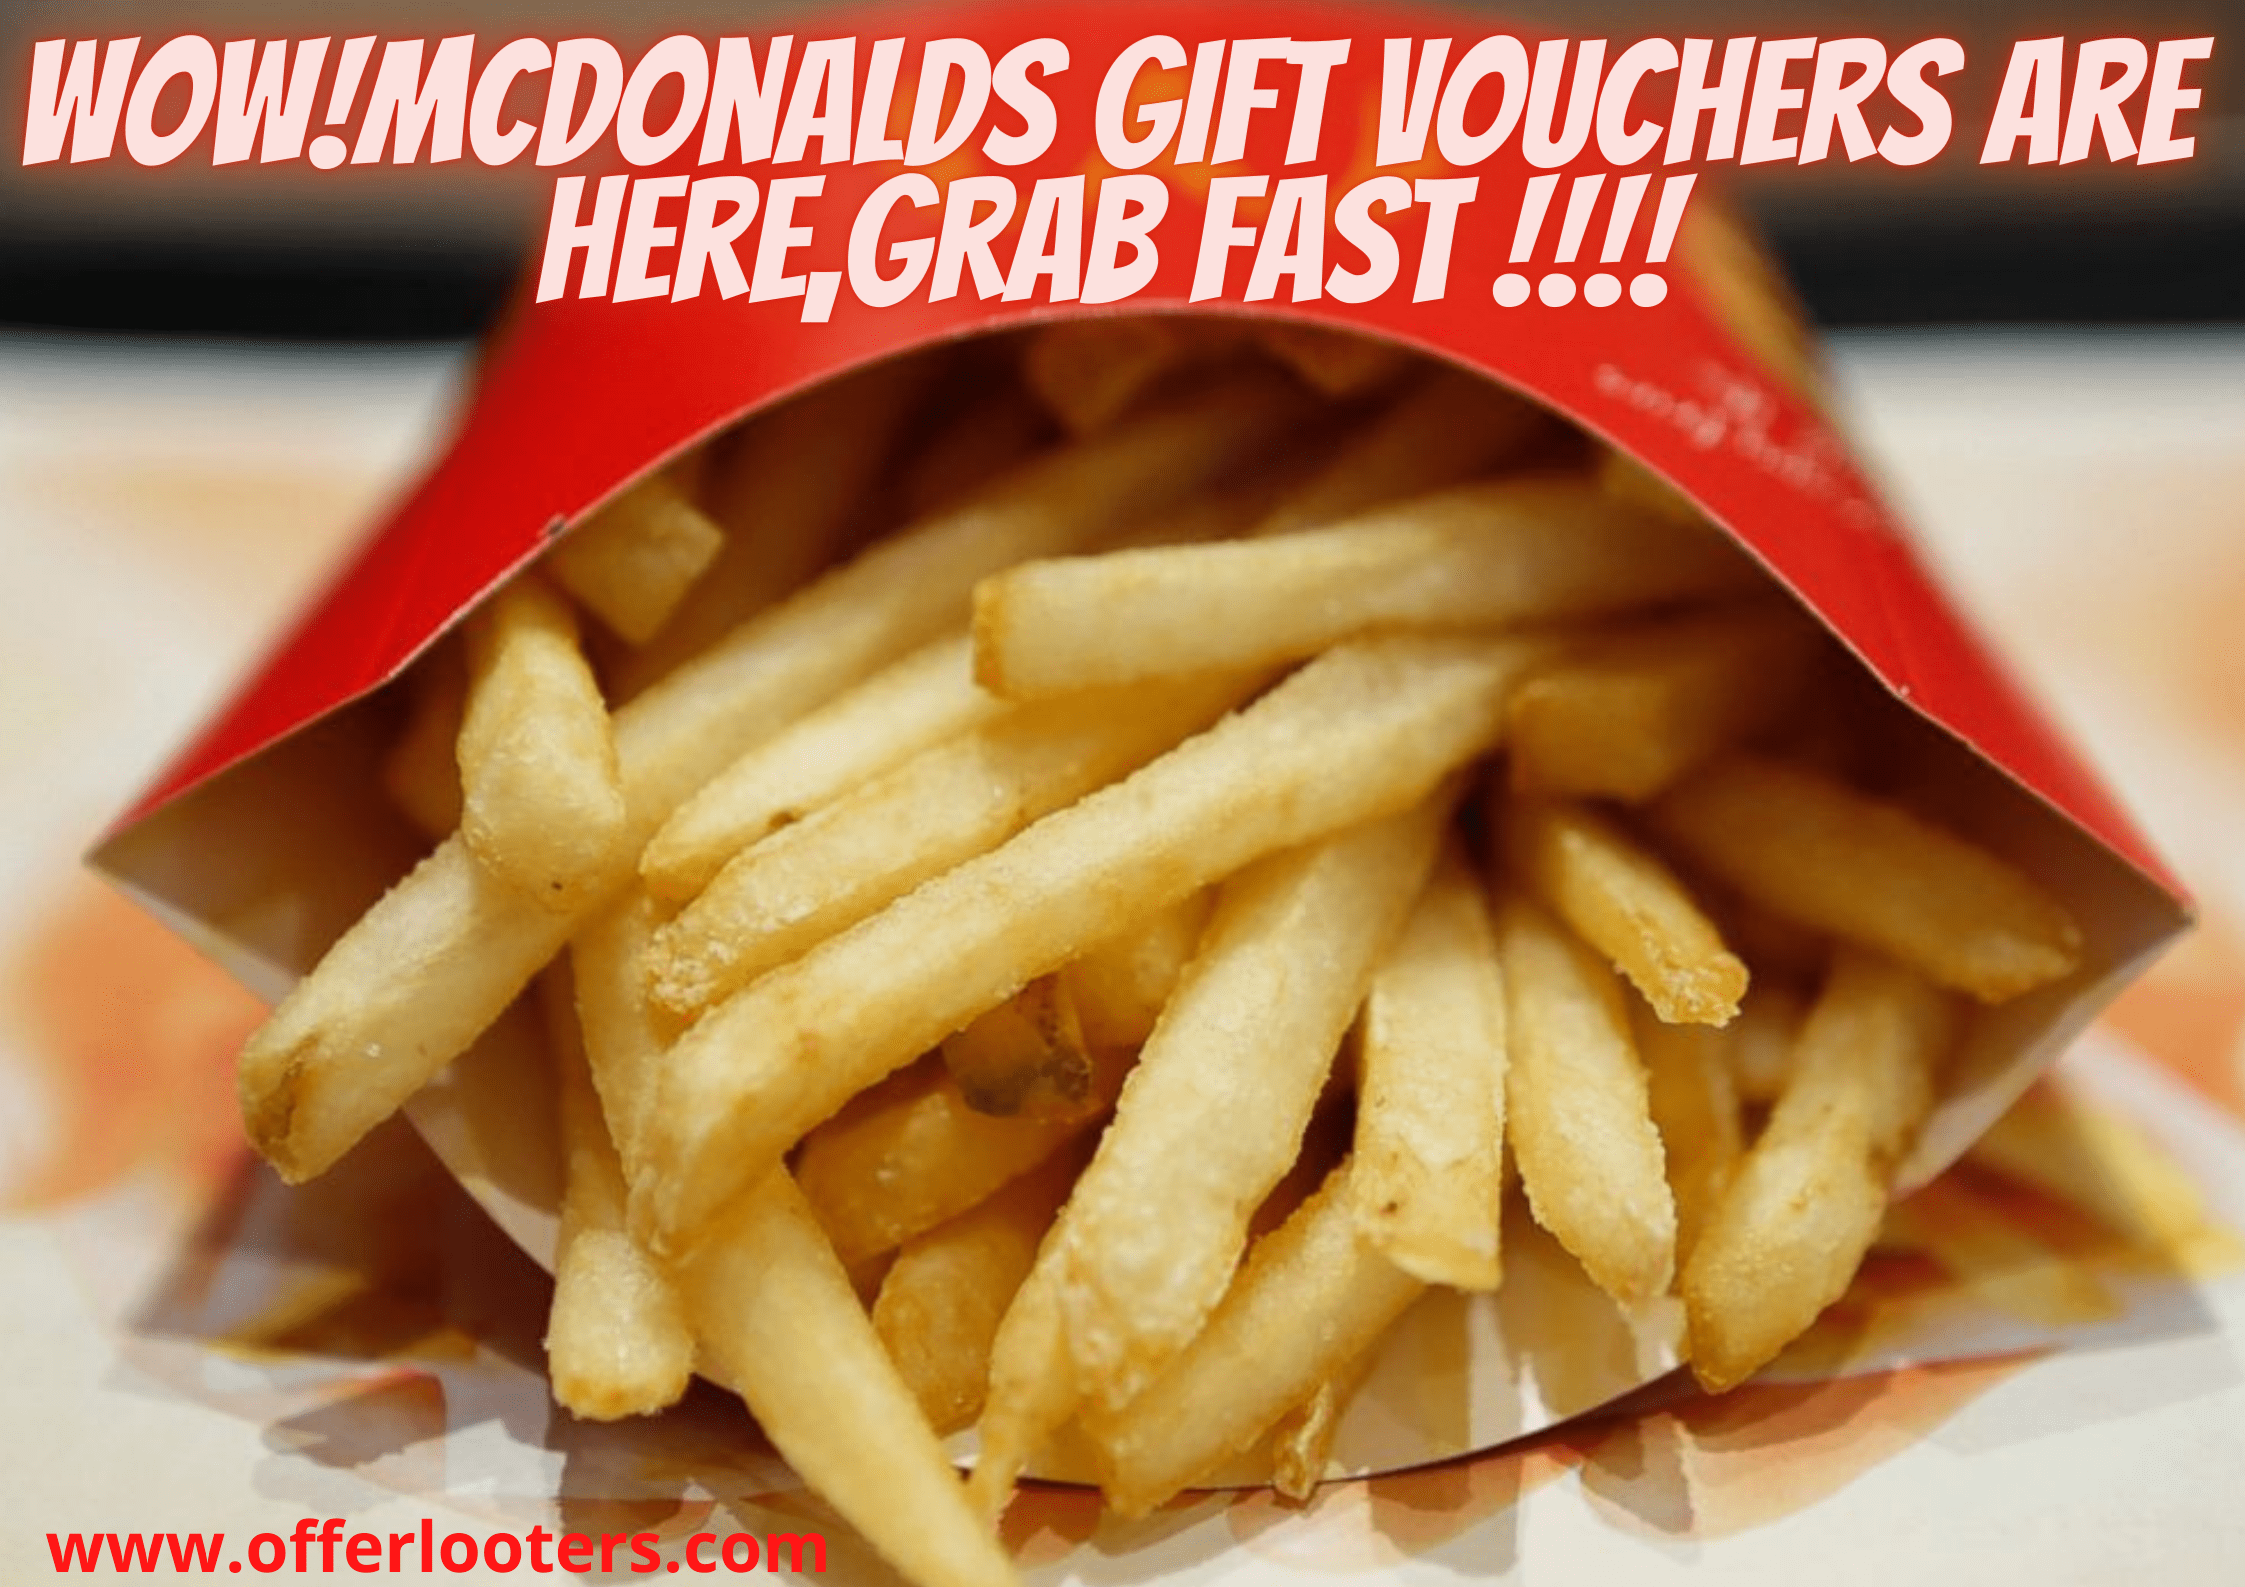 Wow! McDonald’s Gift vouchers Are Here, Grab Fast !!!!